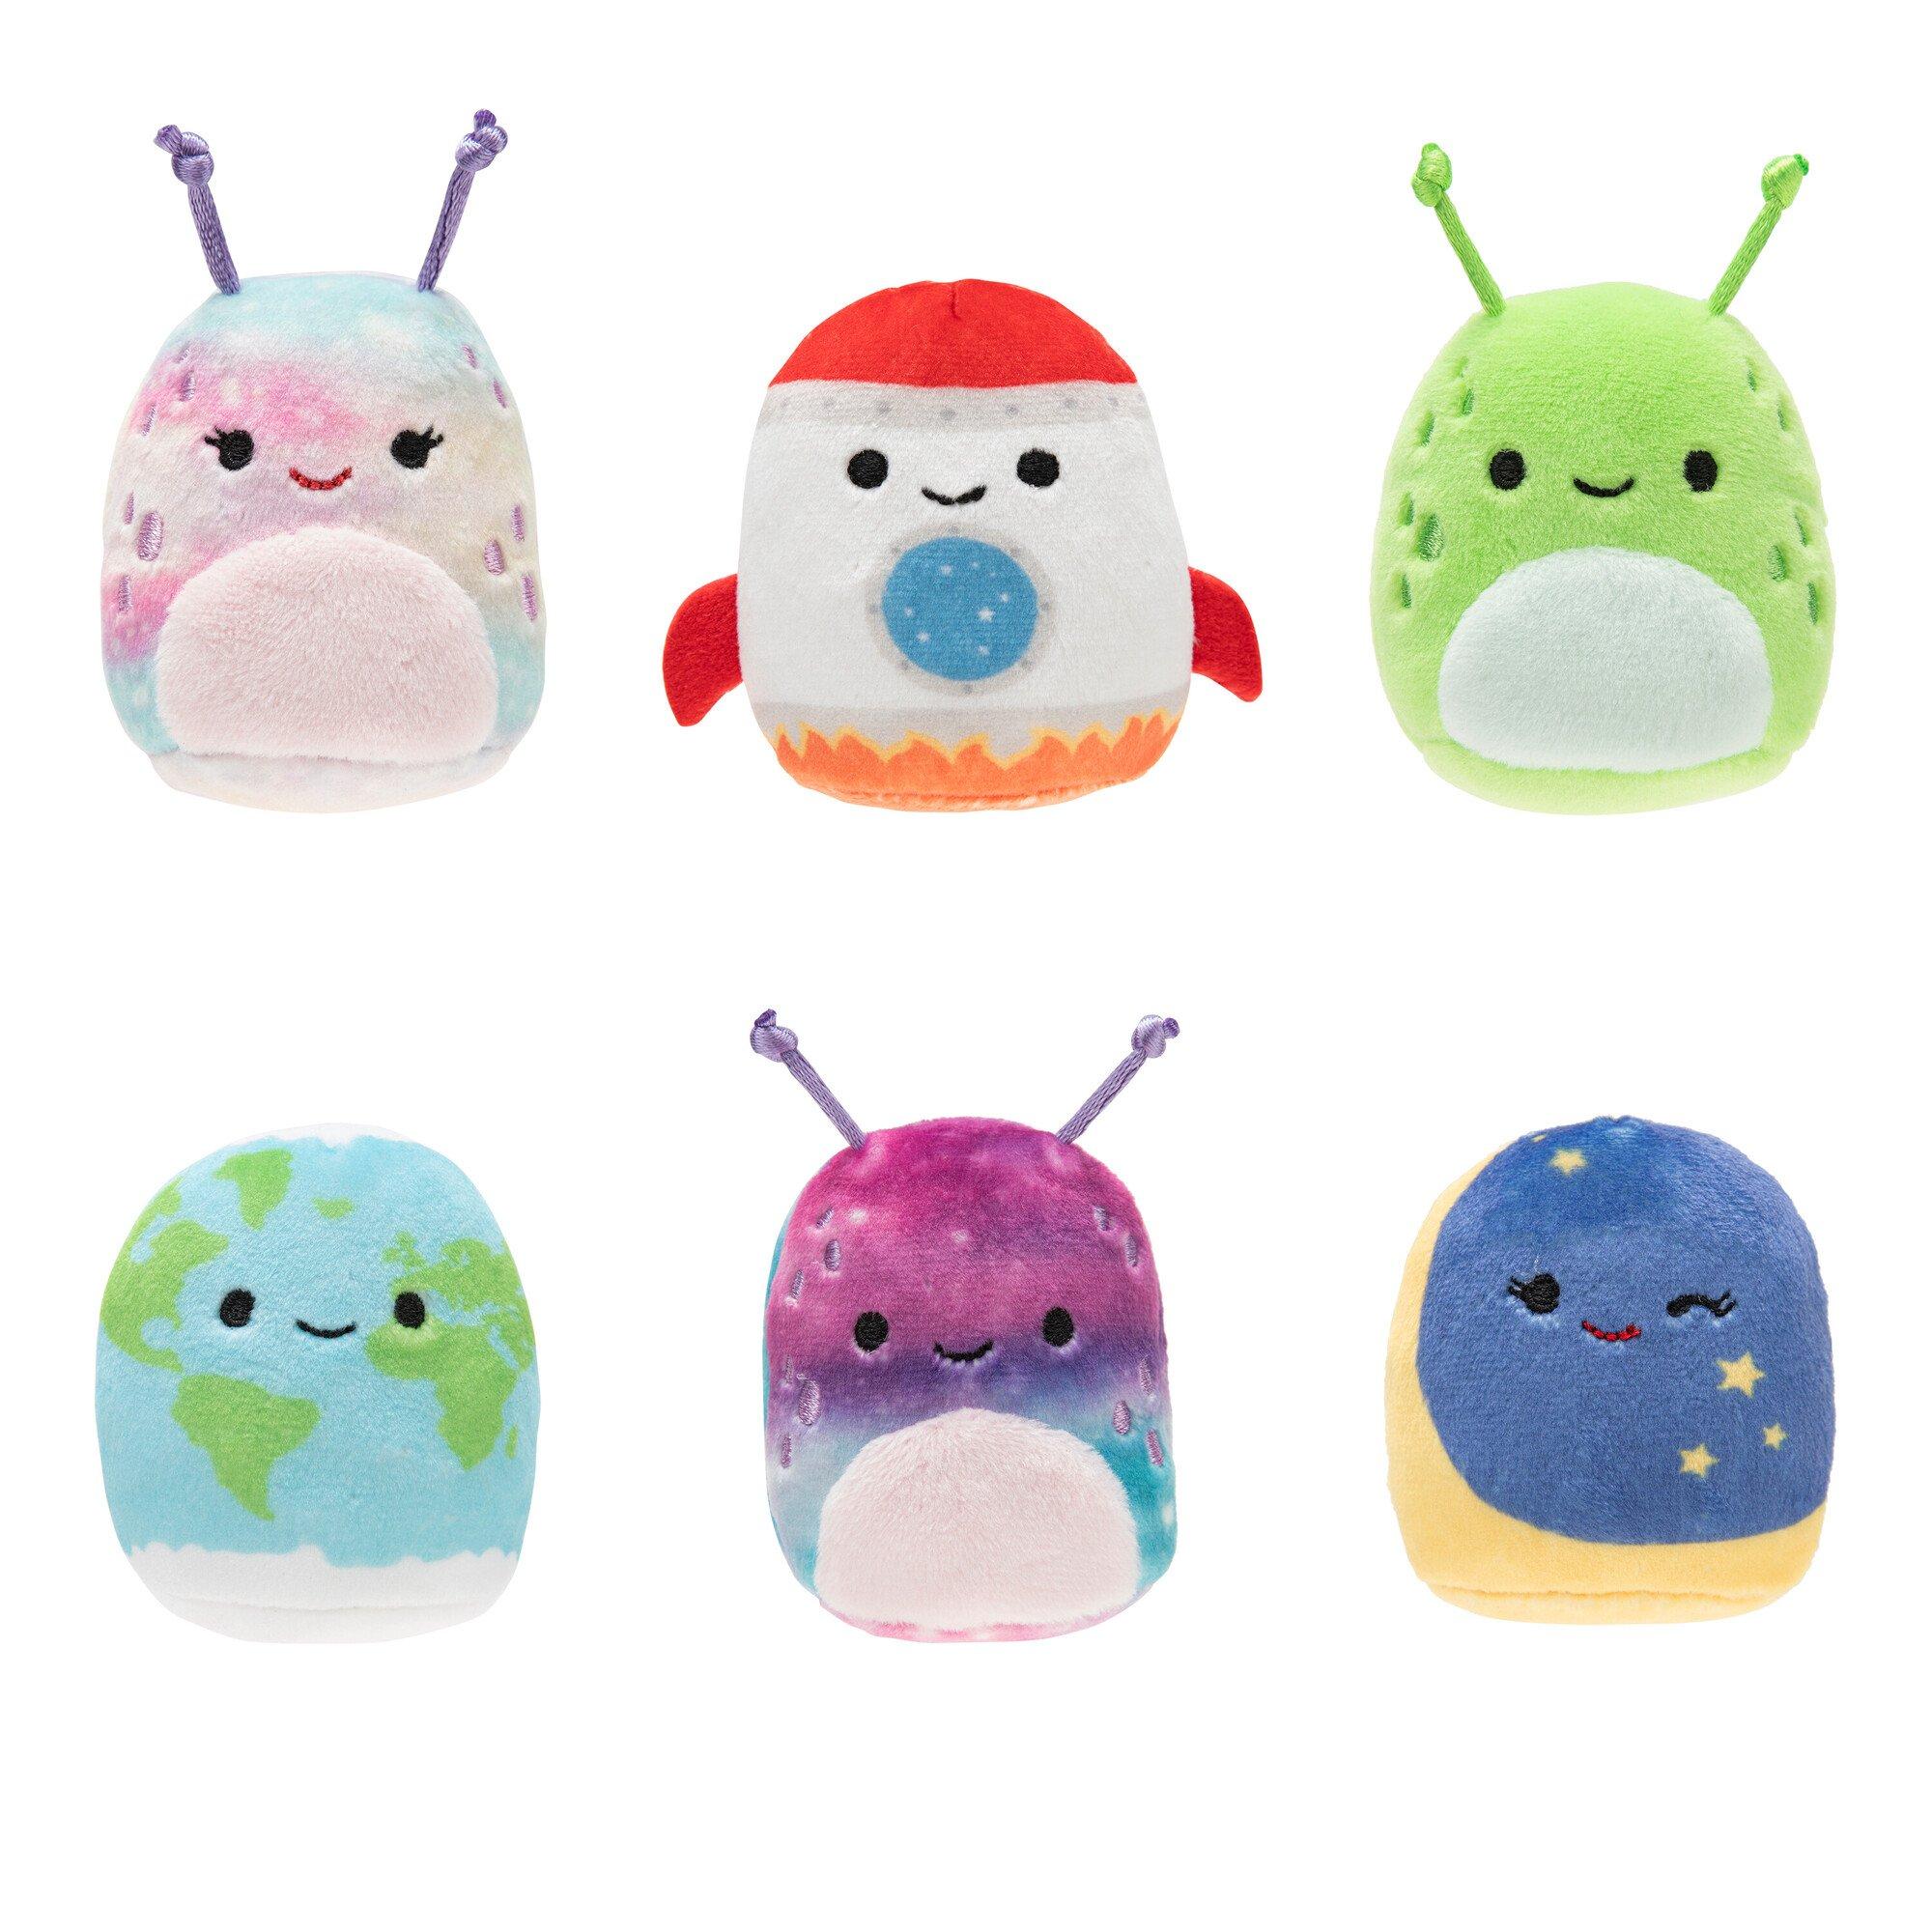 Squishville Squishmallows Mall-Two 2-Inch Mini Plush Characters,Themed Play Scene,4 Accessories (Shopping Bag/Cart,Cash Register,Arcade Machine)